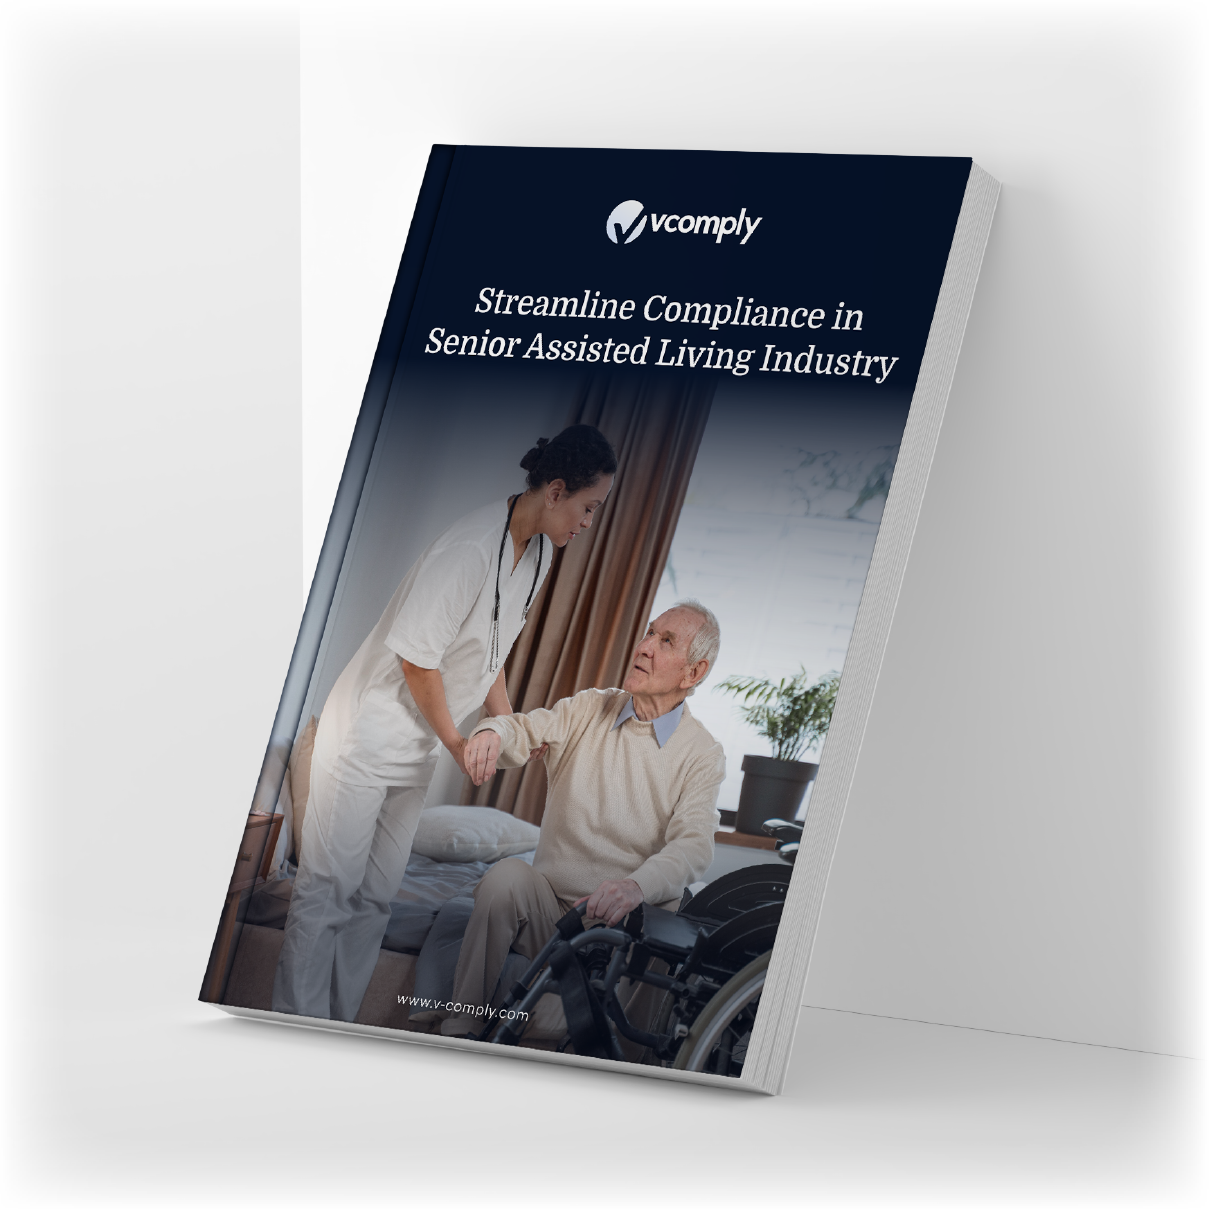 Streamline Compliance in Senior Assisted Living Industry